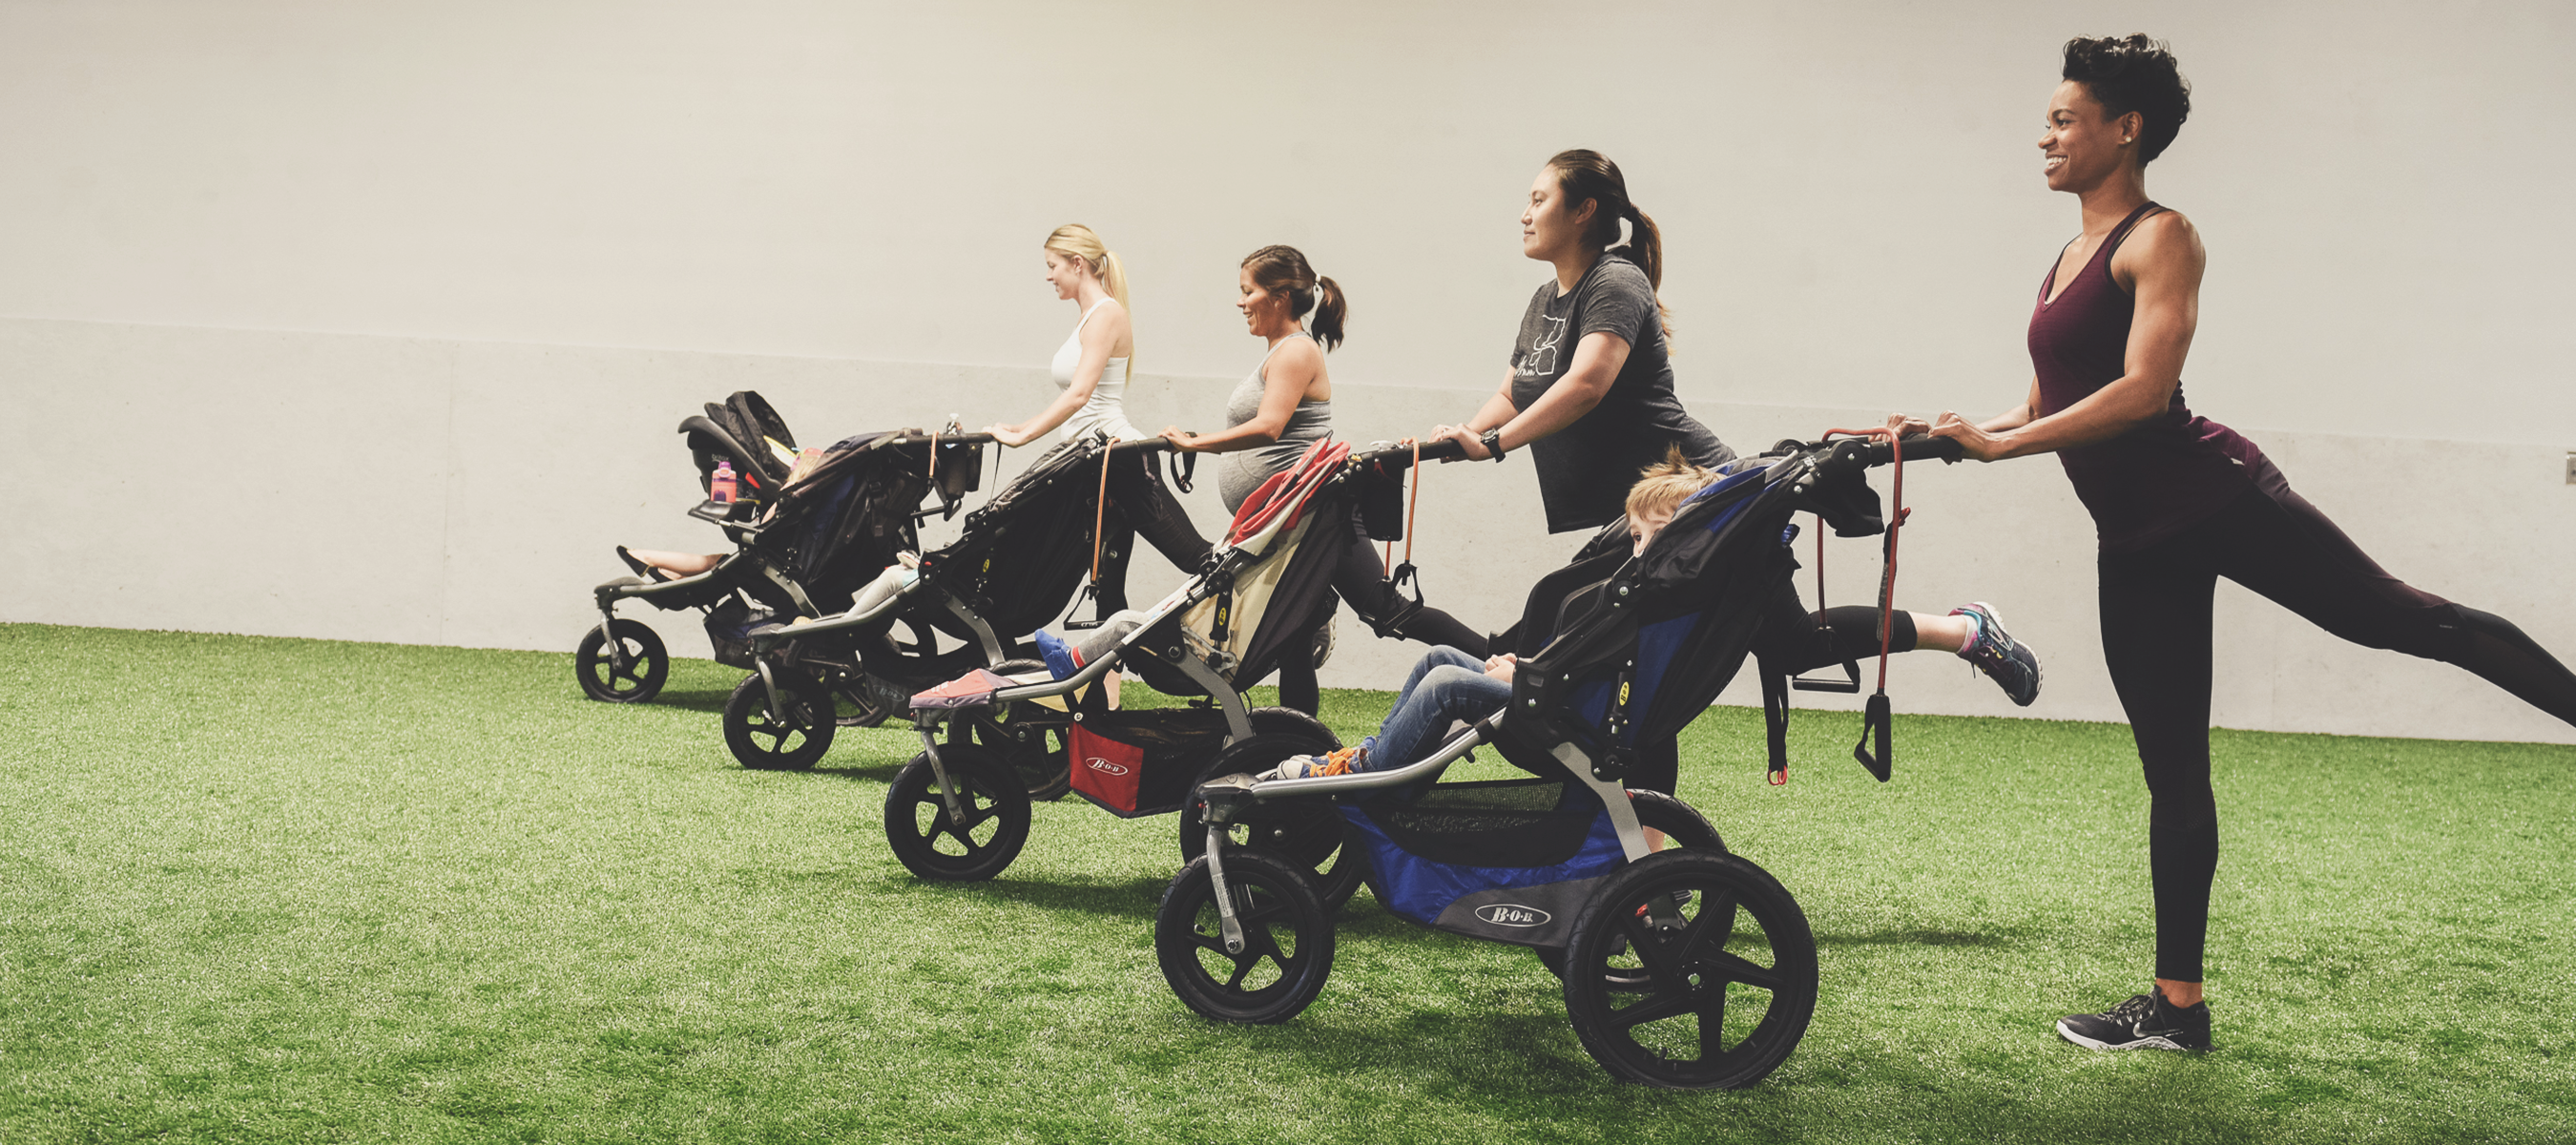 Fitness Classes For Moms - FIT4MOM II Strength In Motherhood